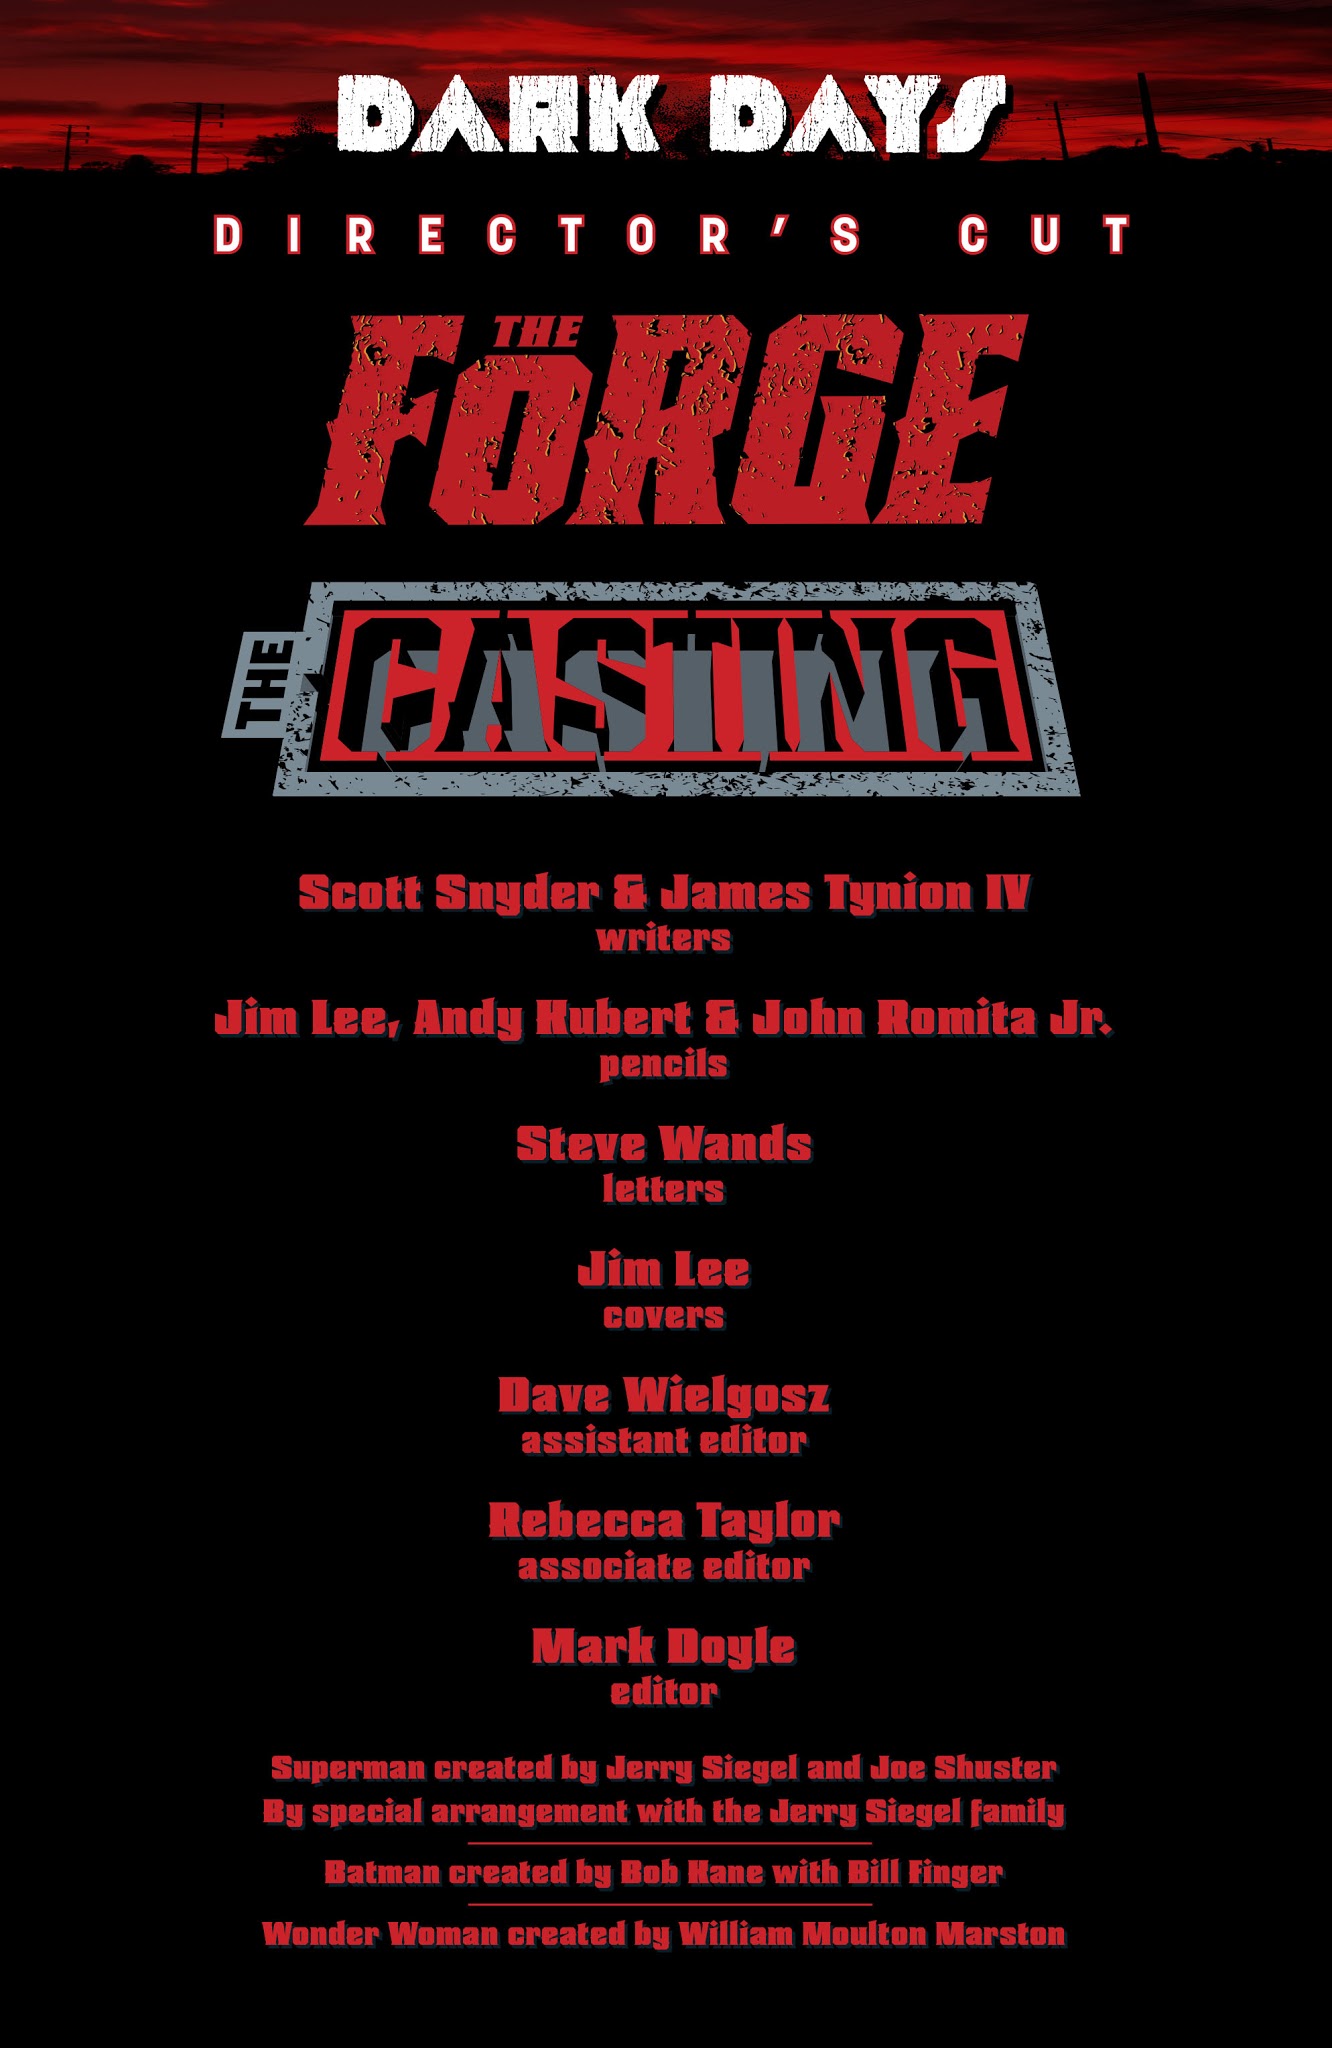 Read online Dark Days: The Forge/Casting Director's Cut comic -  Issue # Full - 3